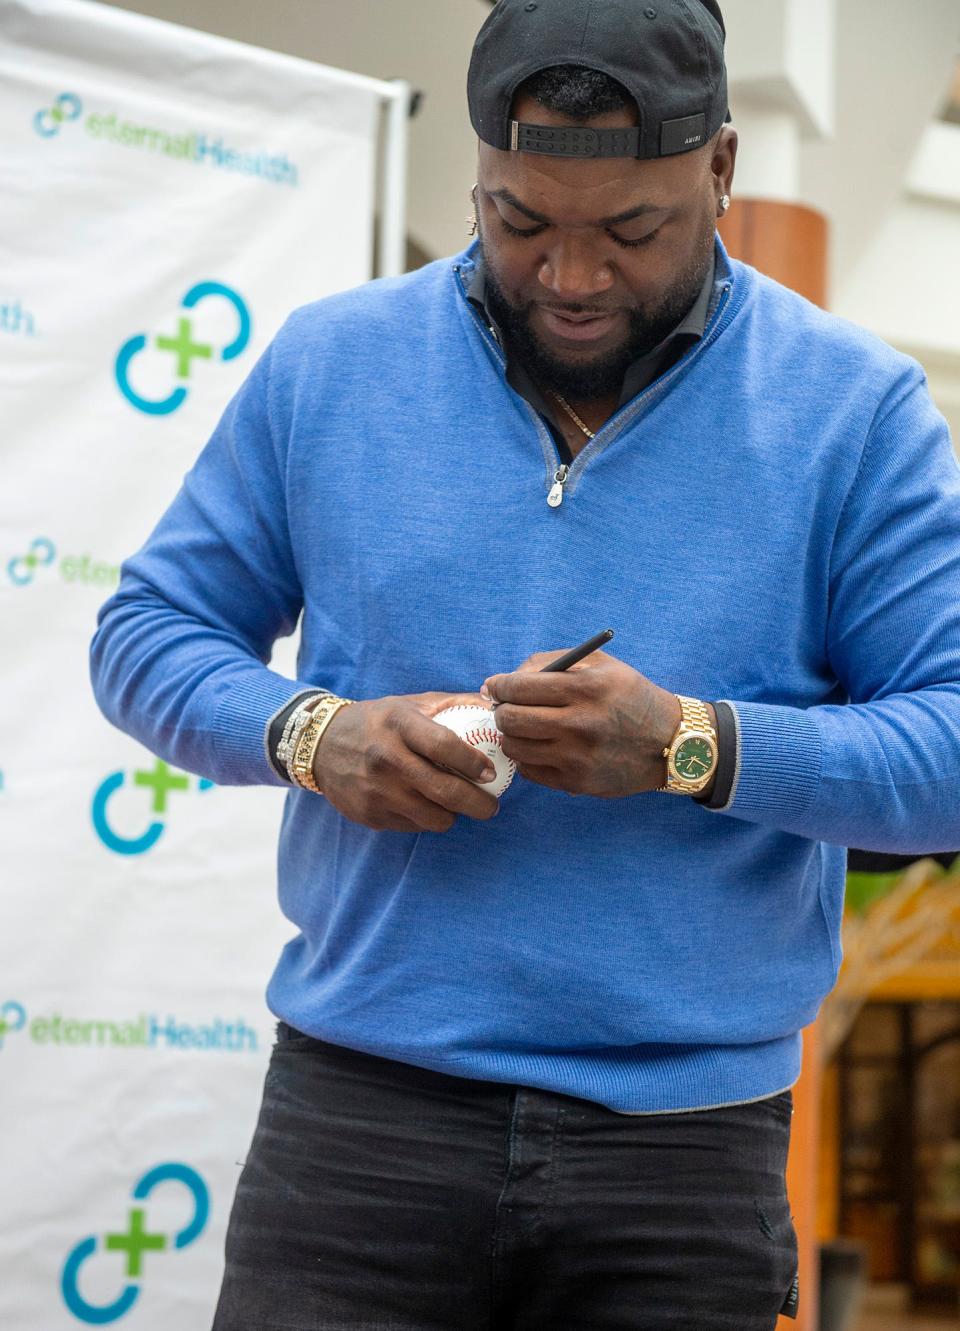 David Ortiz signs a baseball during his visit Monday to the Natick Mall, Oct. 10, 2022.